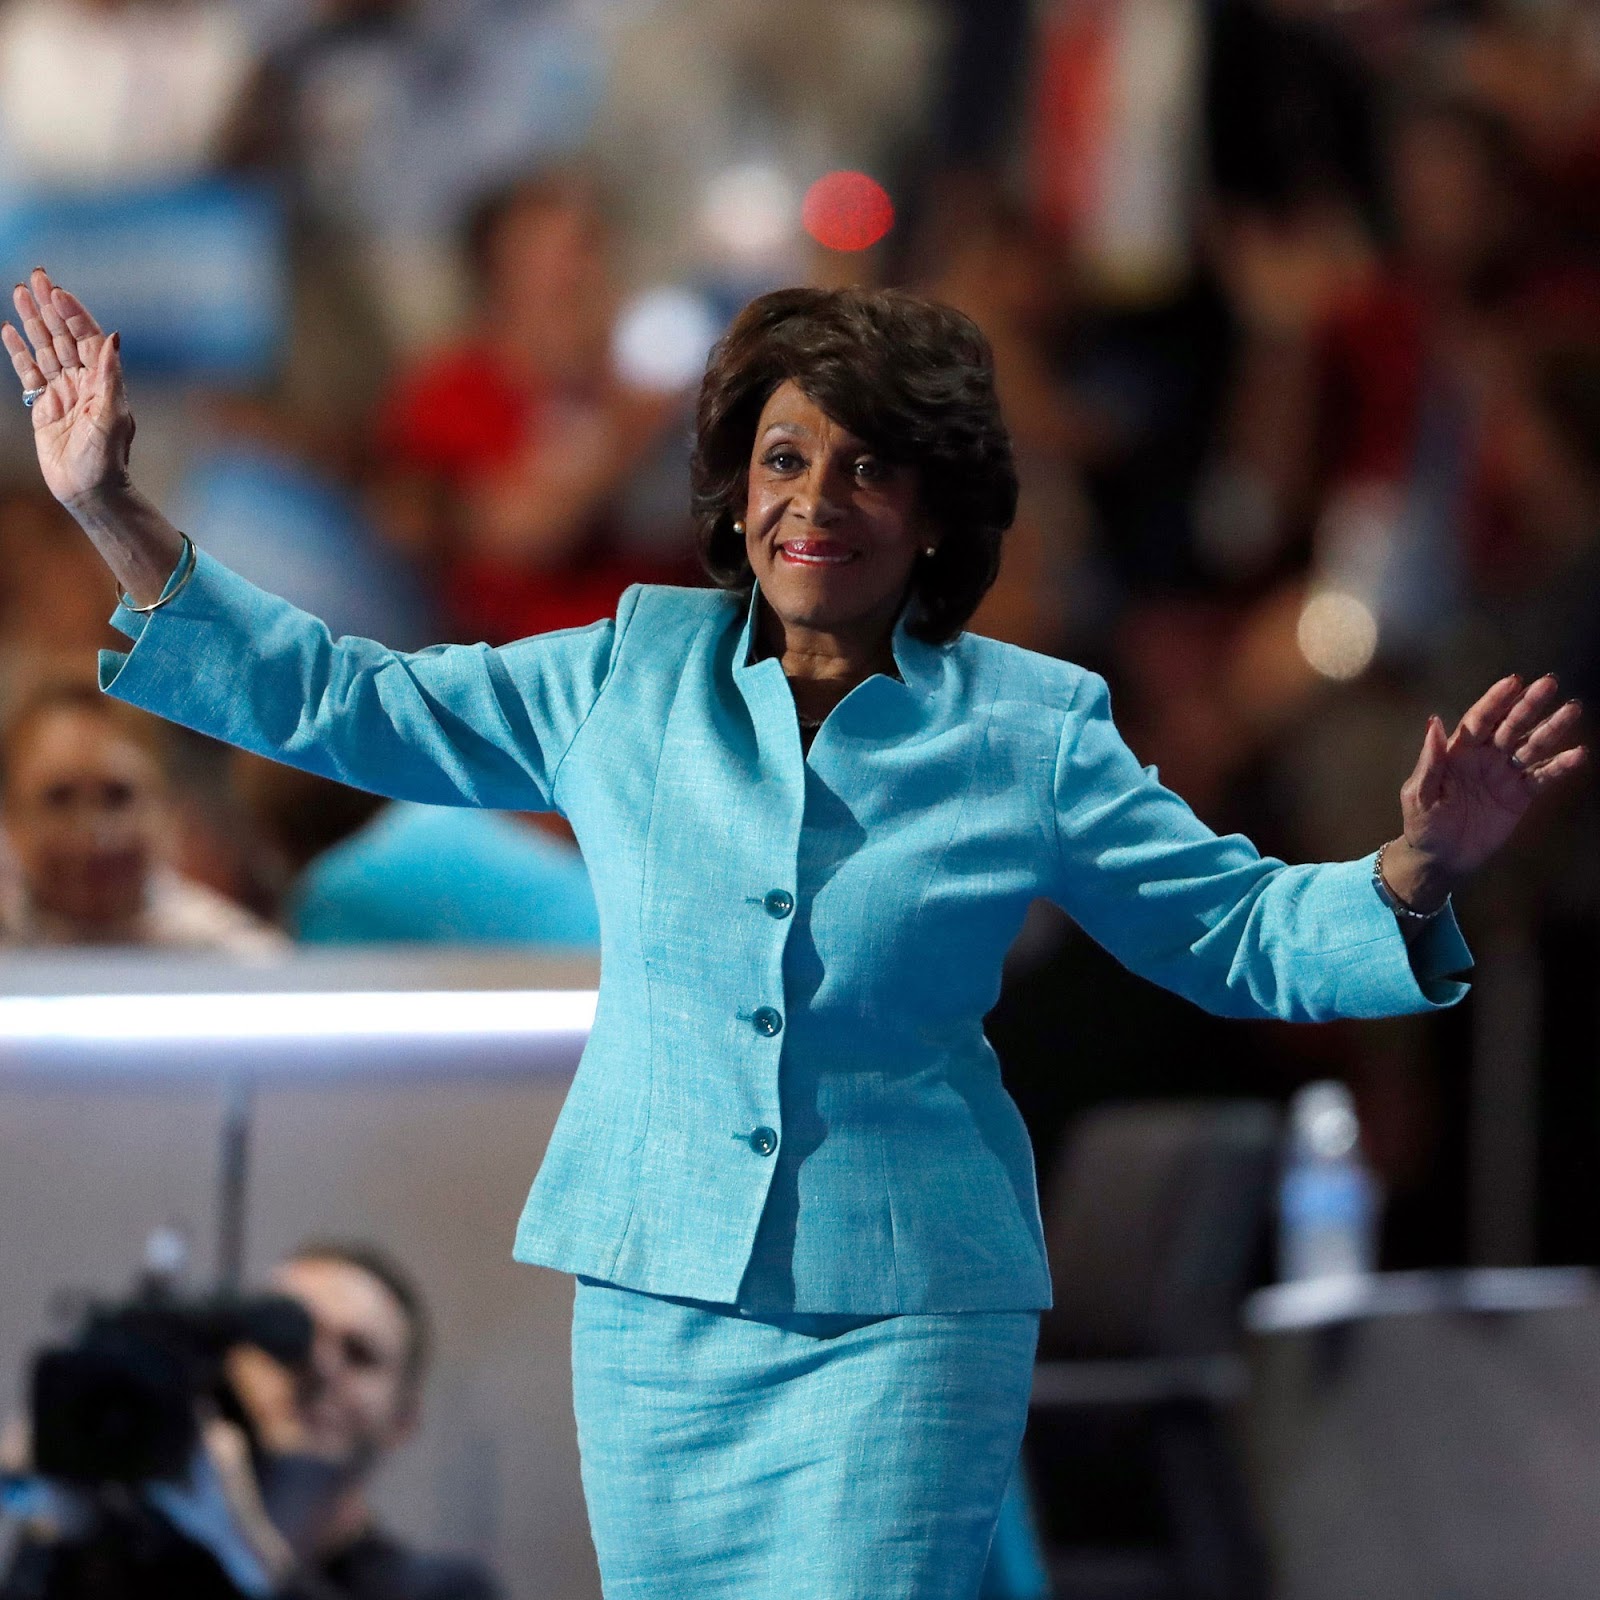 A Look at Congresswoman Maxine Waters's Statement-Making Style | Vogue